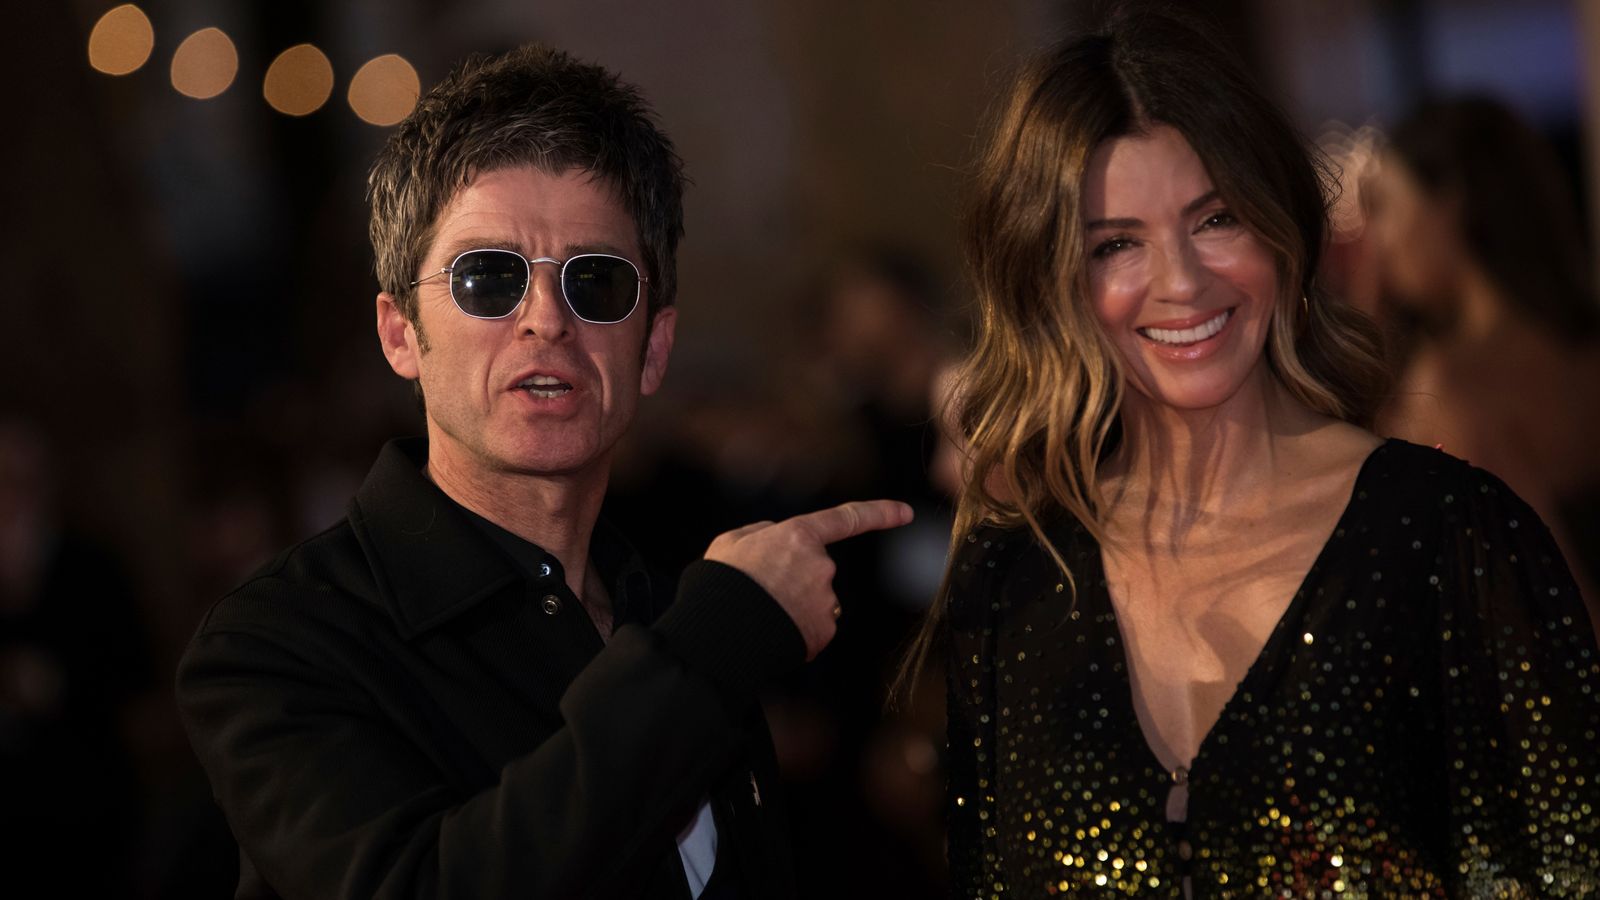 Noel Gallagher and Sara MacDonald announce divorce after 22 years together